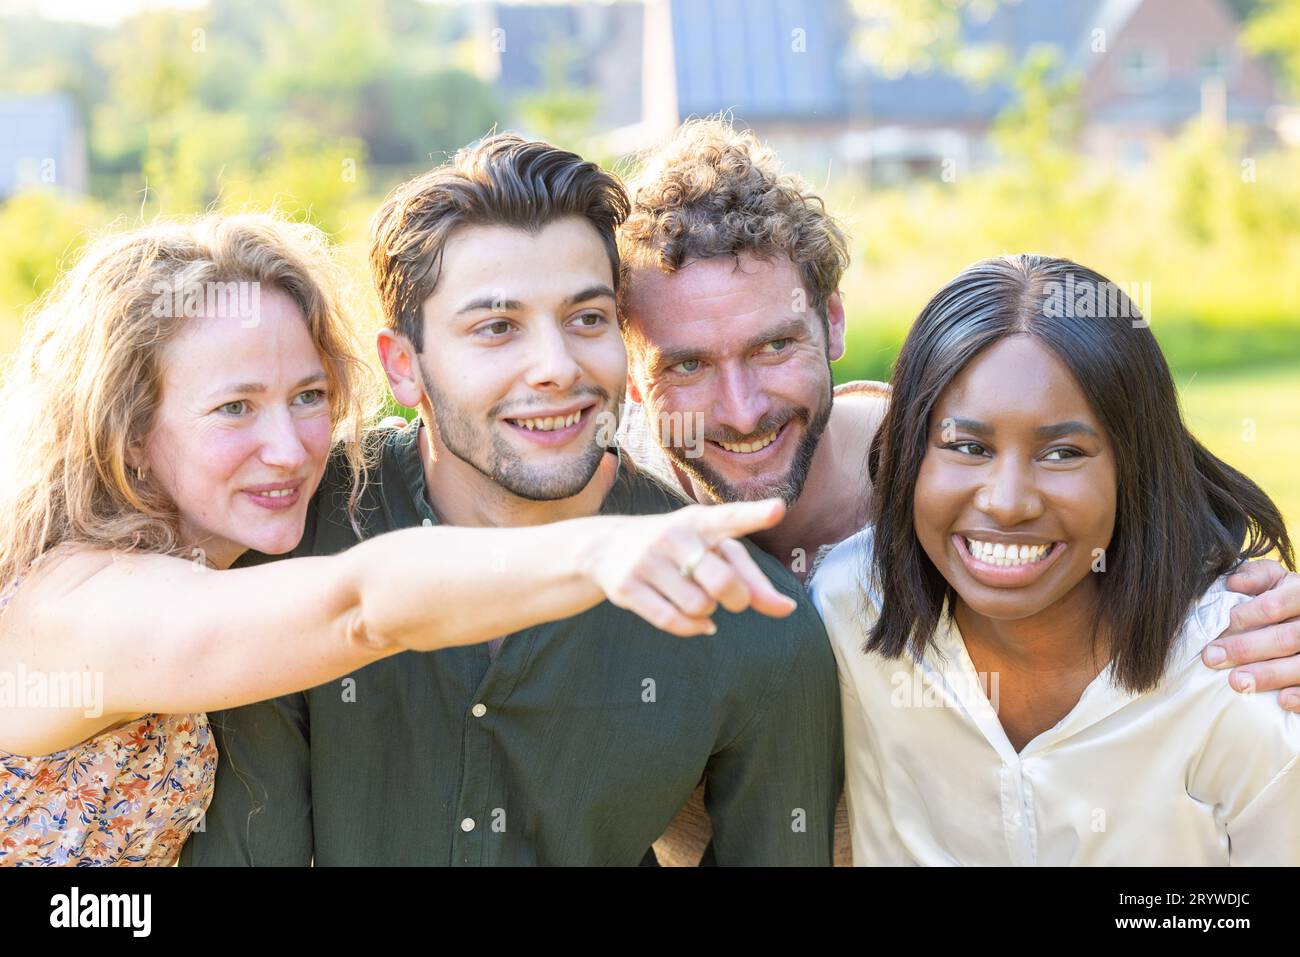 Group of diverse multi ethnic young friends or colleagues enjoying each others company a in a casual outdoor setting after work Stock Photo